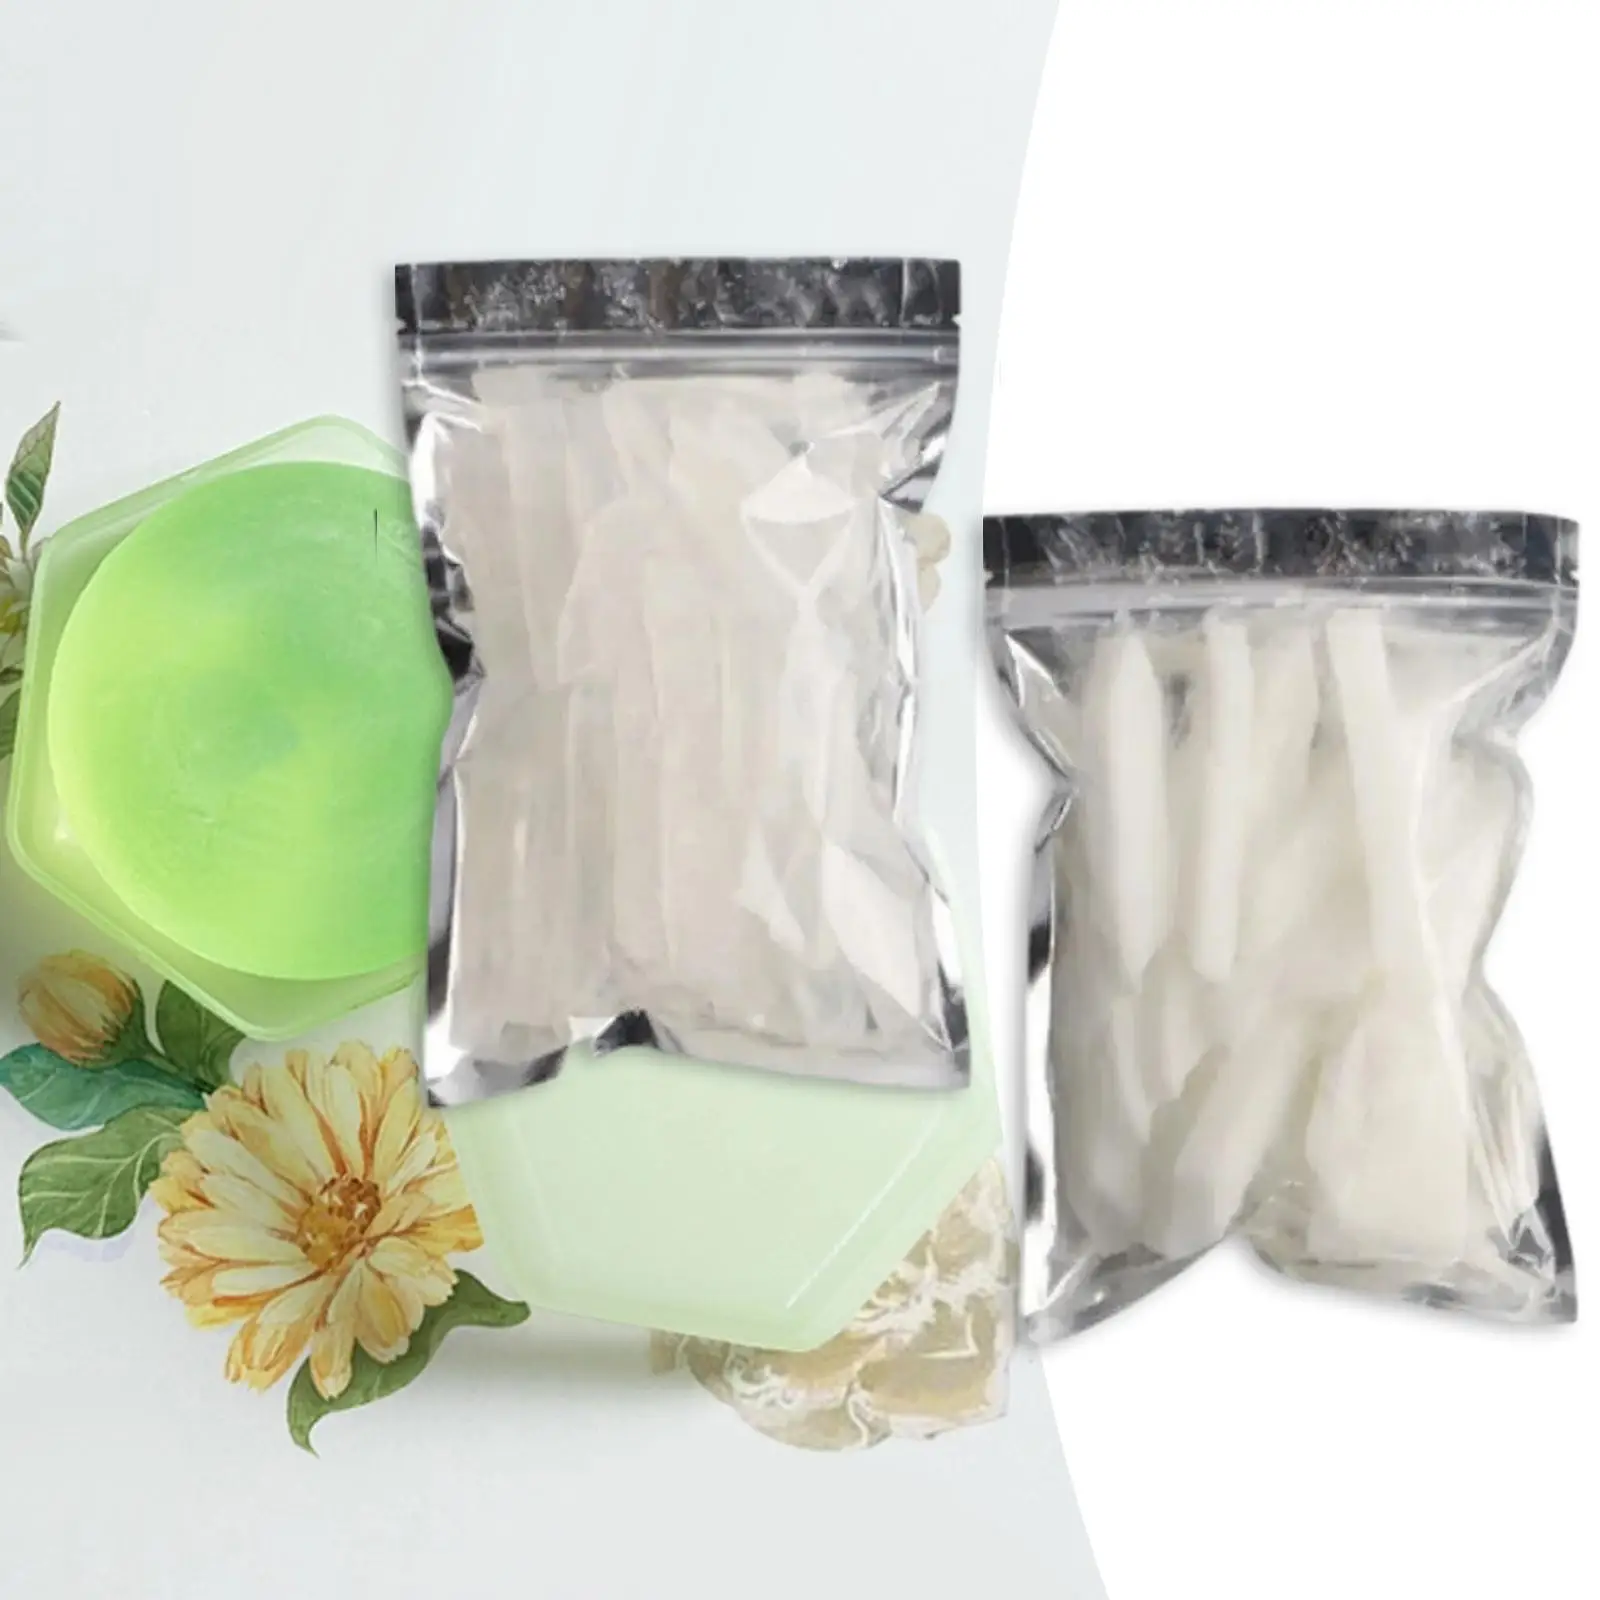 Soap Base Soap Crafting for Soap Making Easy to Make Coconut Oil, Palm Oil, Glycerin Handmade Soap Material Unisex Beginners